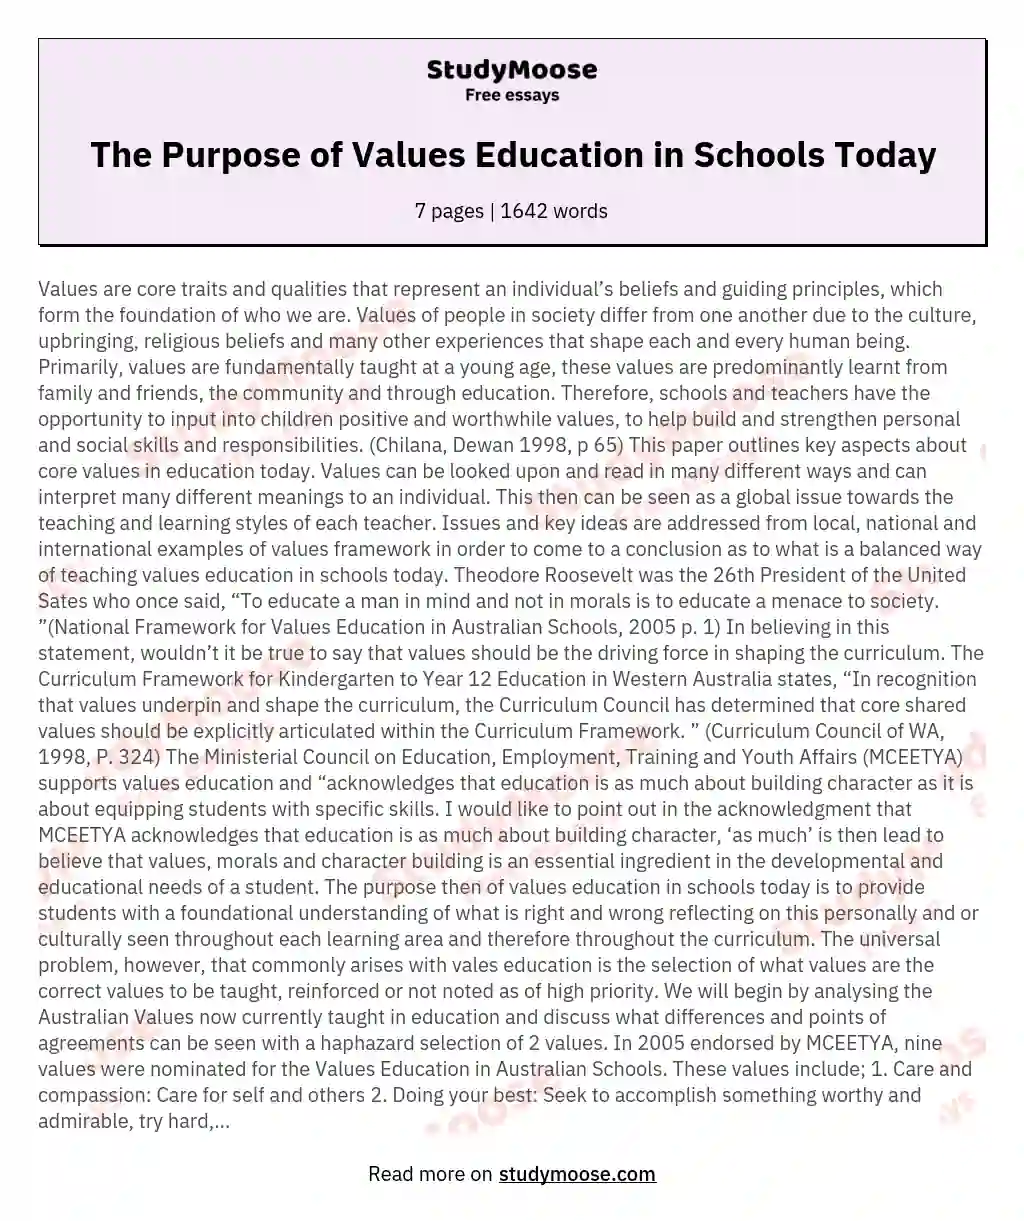 The Purpose of Values Education in Schools Today essay